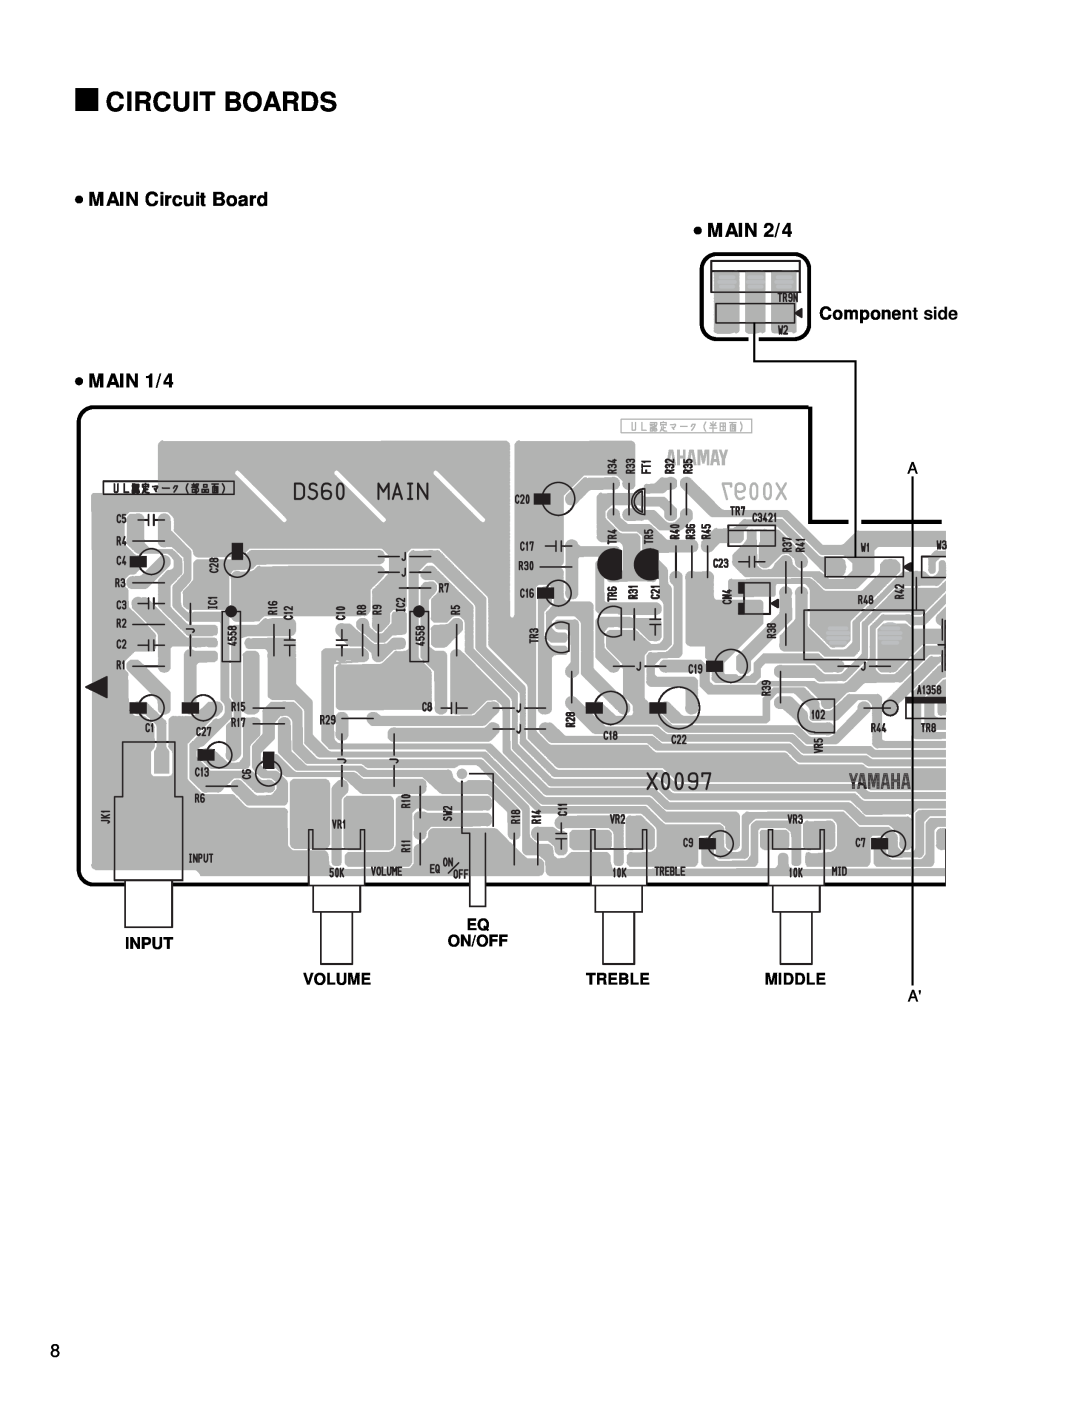 Yamaha DS60-112 service manual Circuit Boards, MAIN Circuit Board MAIN 2/4, MAIN 1/4, Input, On/Off, Volume, Treble, Middle 